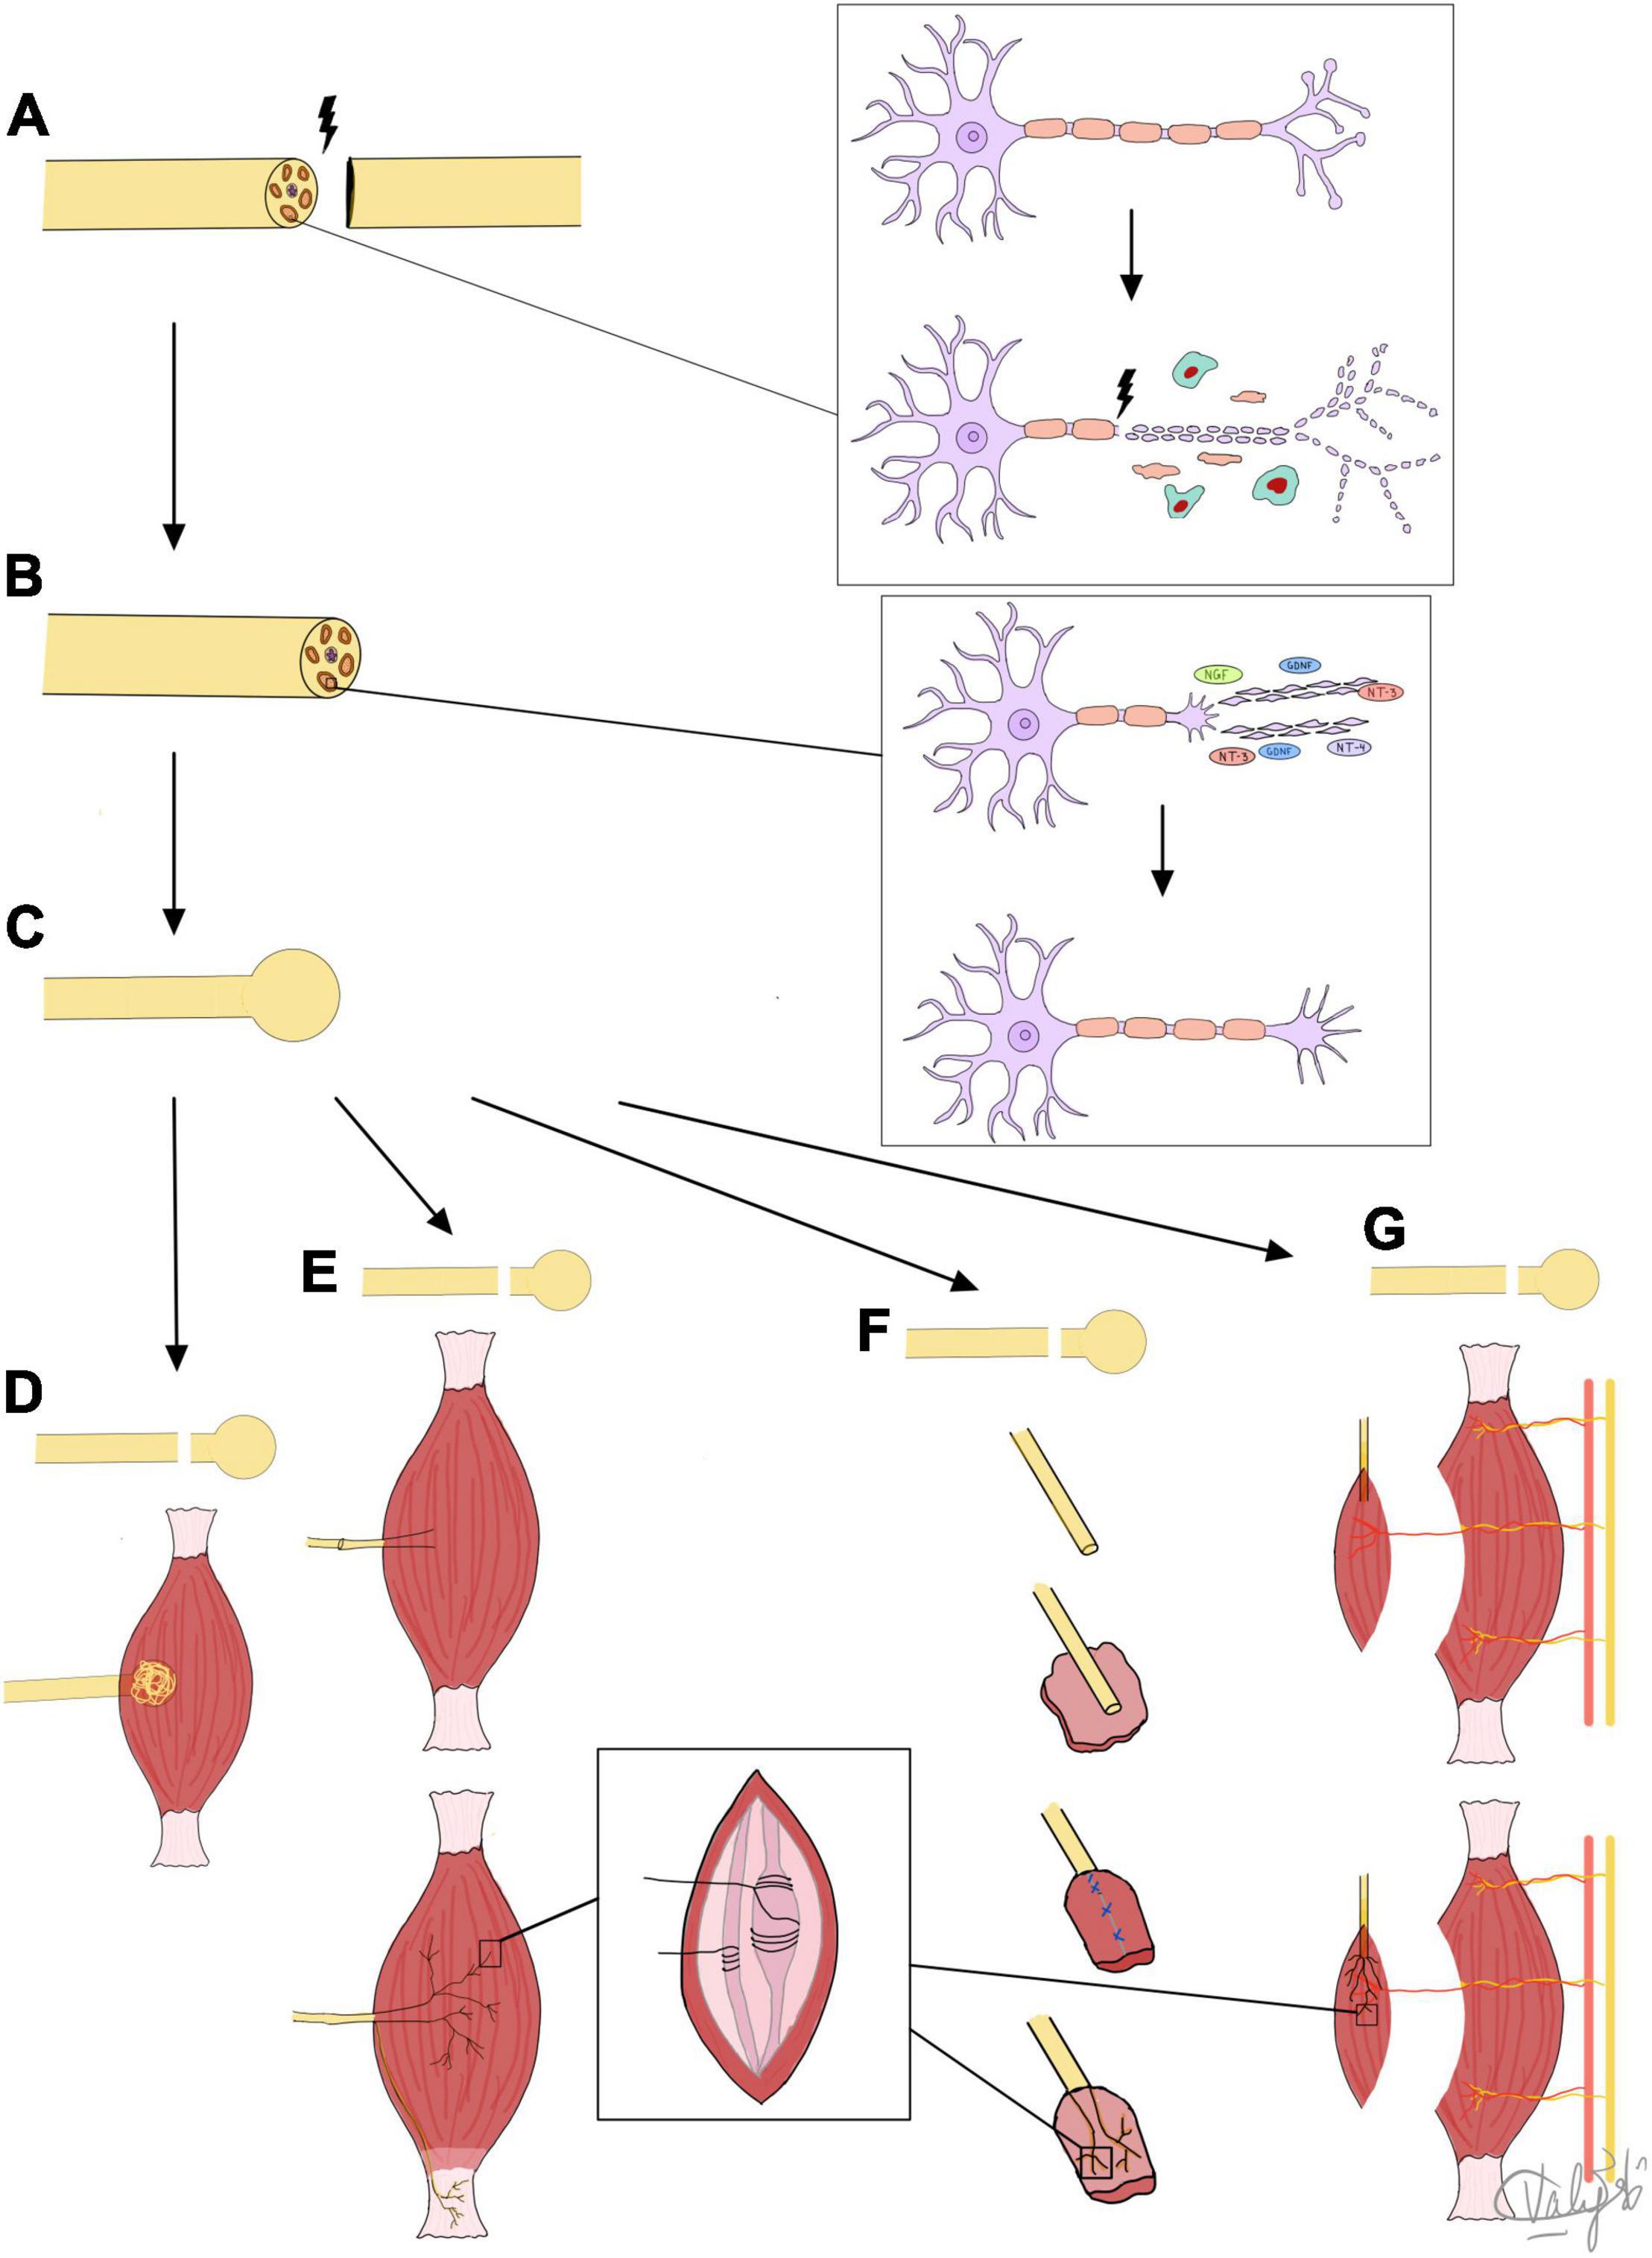 after axonal injury regeneration in peripheral nerves is guided by